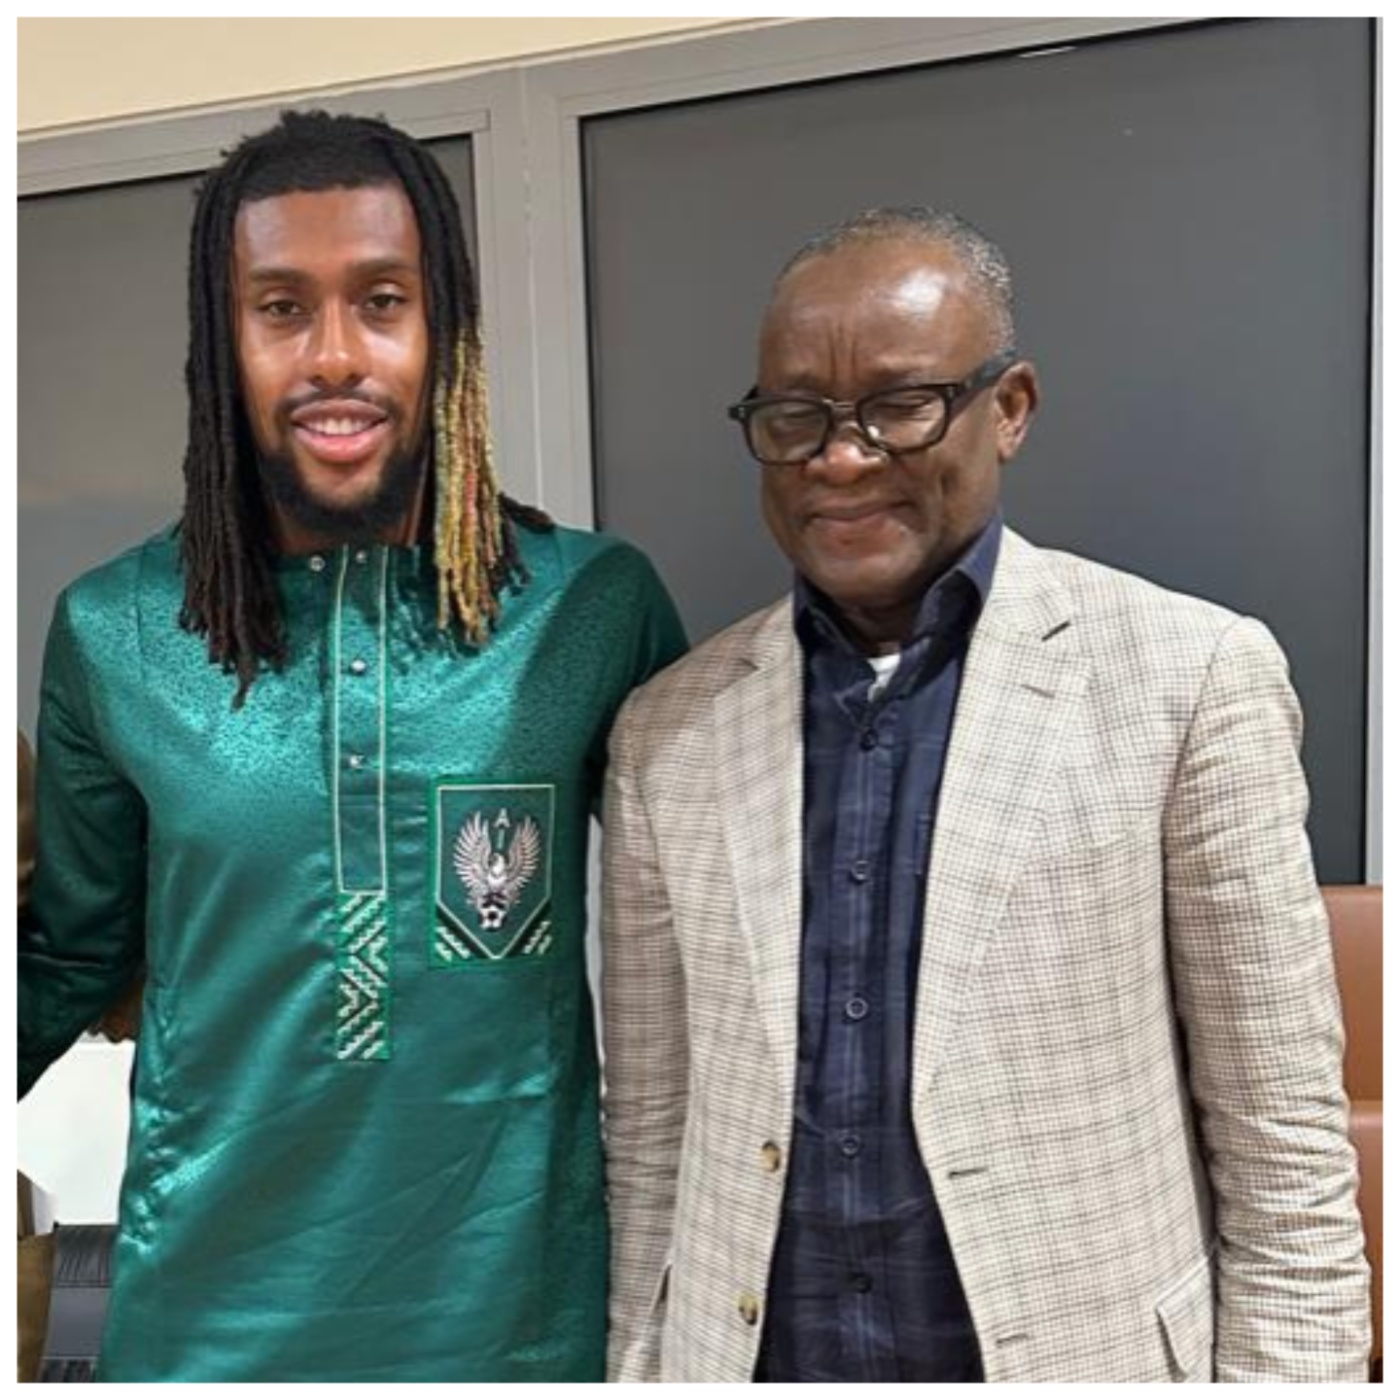 AFCON: 'Be strong, you did your best for Nigeria' - Sports minister tells Iwobi